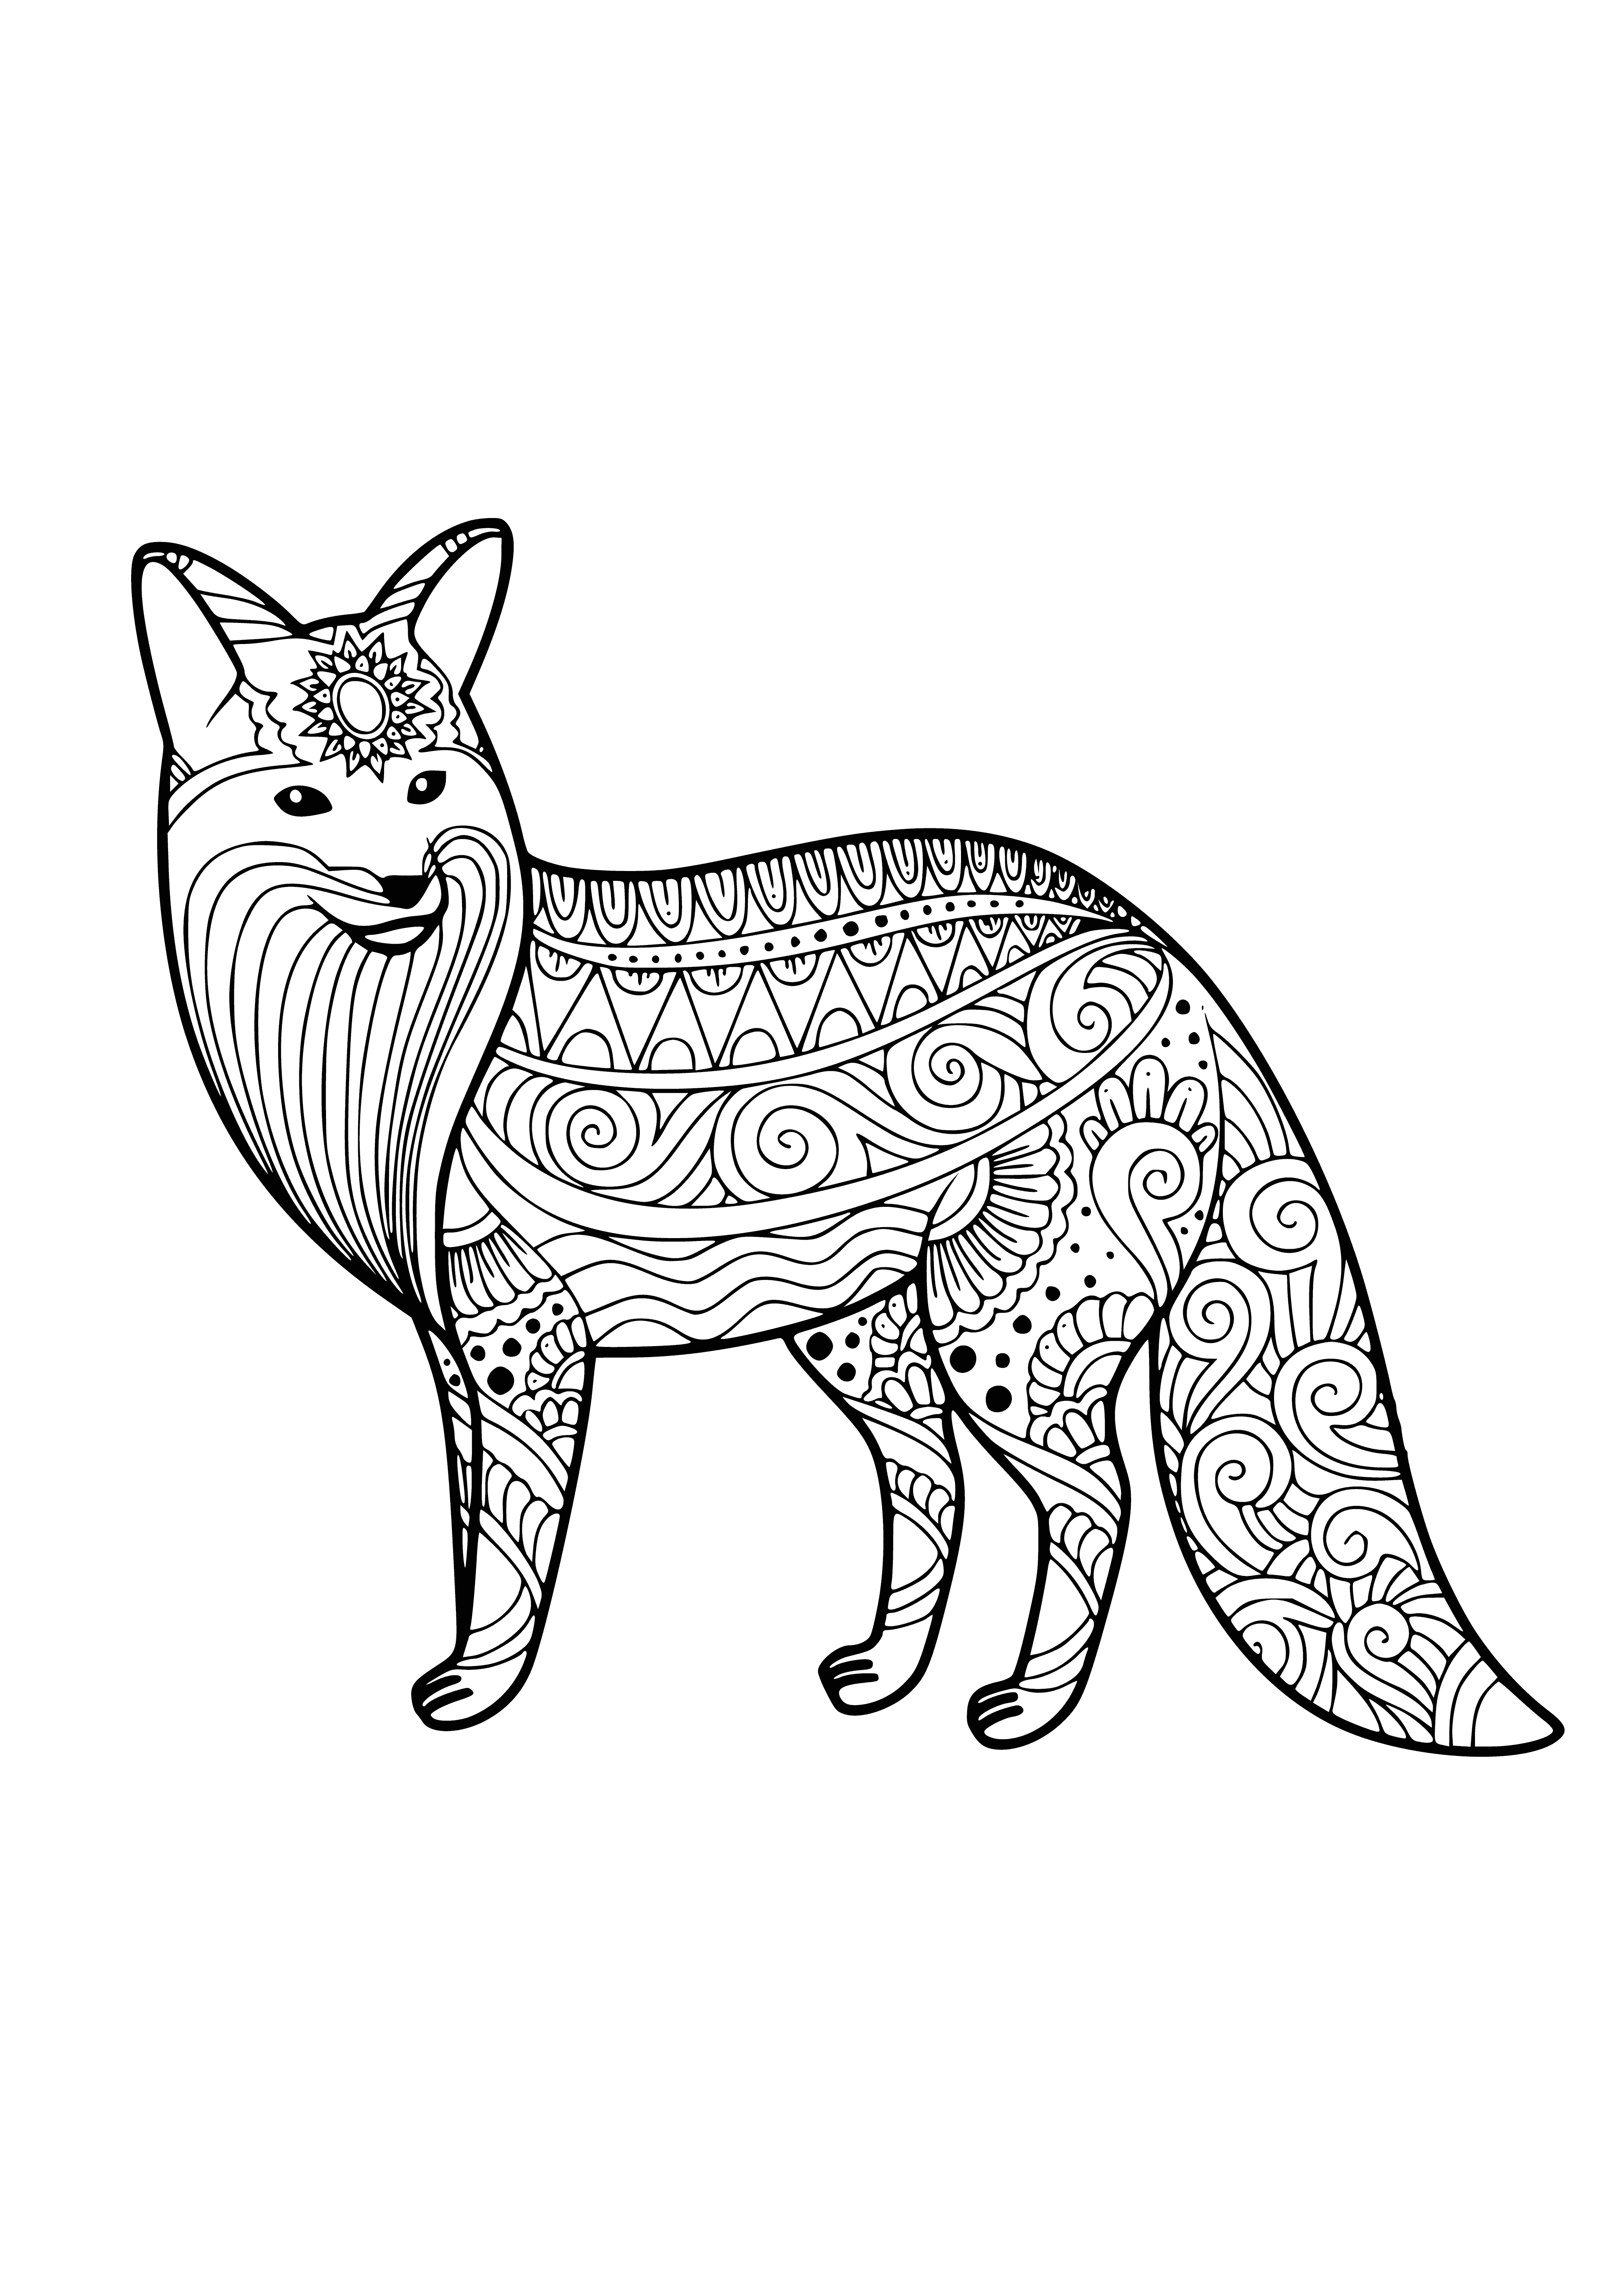 coloring page: Vibrant-colored fox looks innocent and playful. #nature